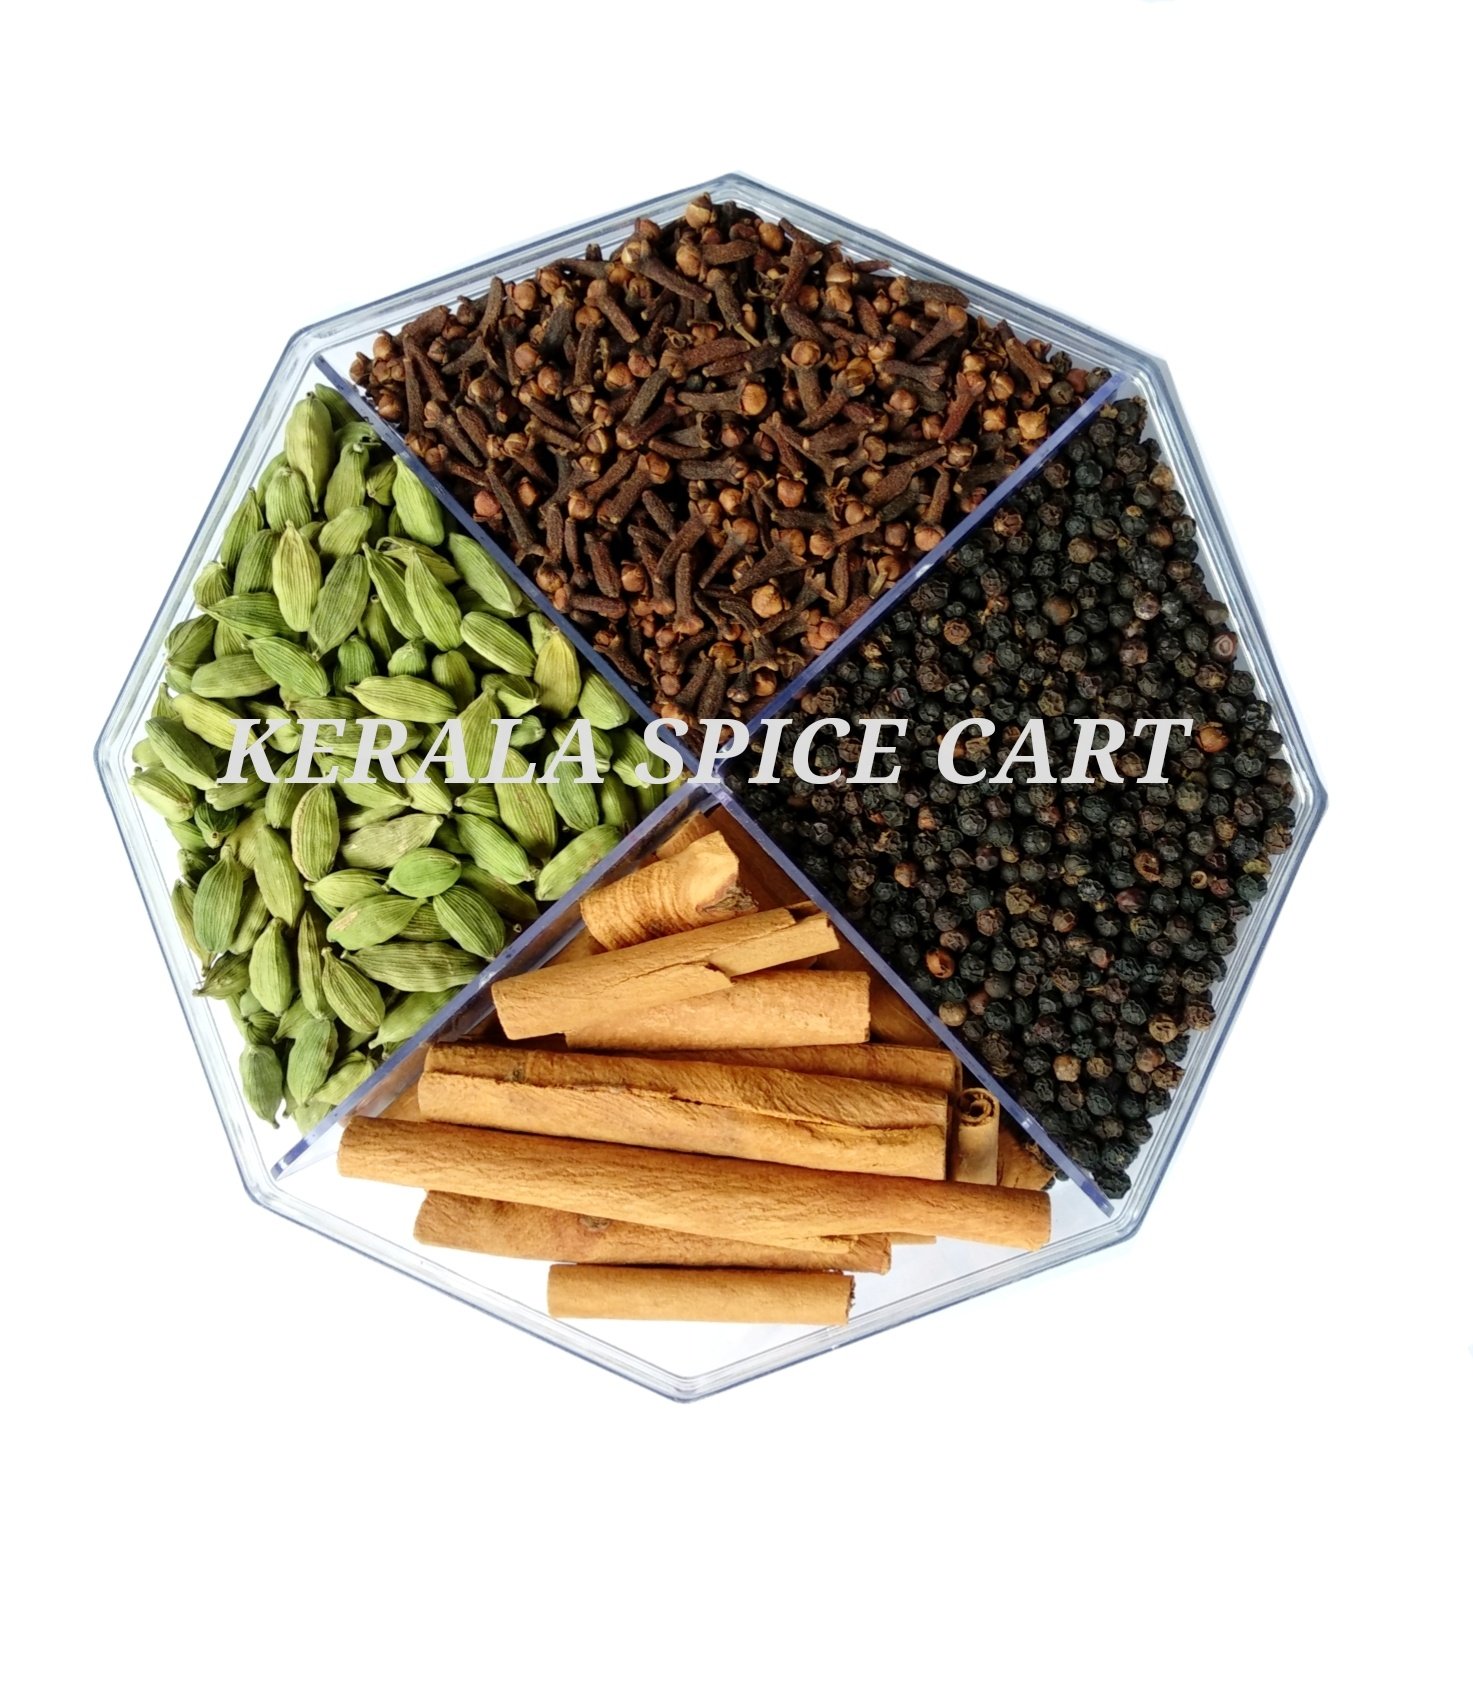 Spices boxes Online - Spice Gift Box Online - keralaspicesonline.com